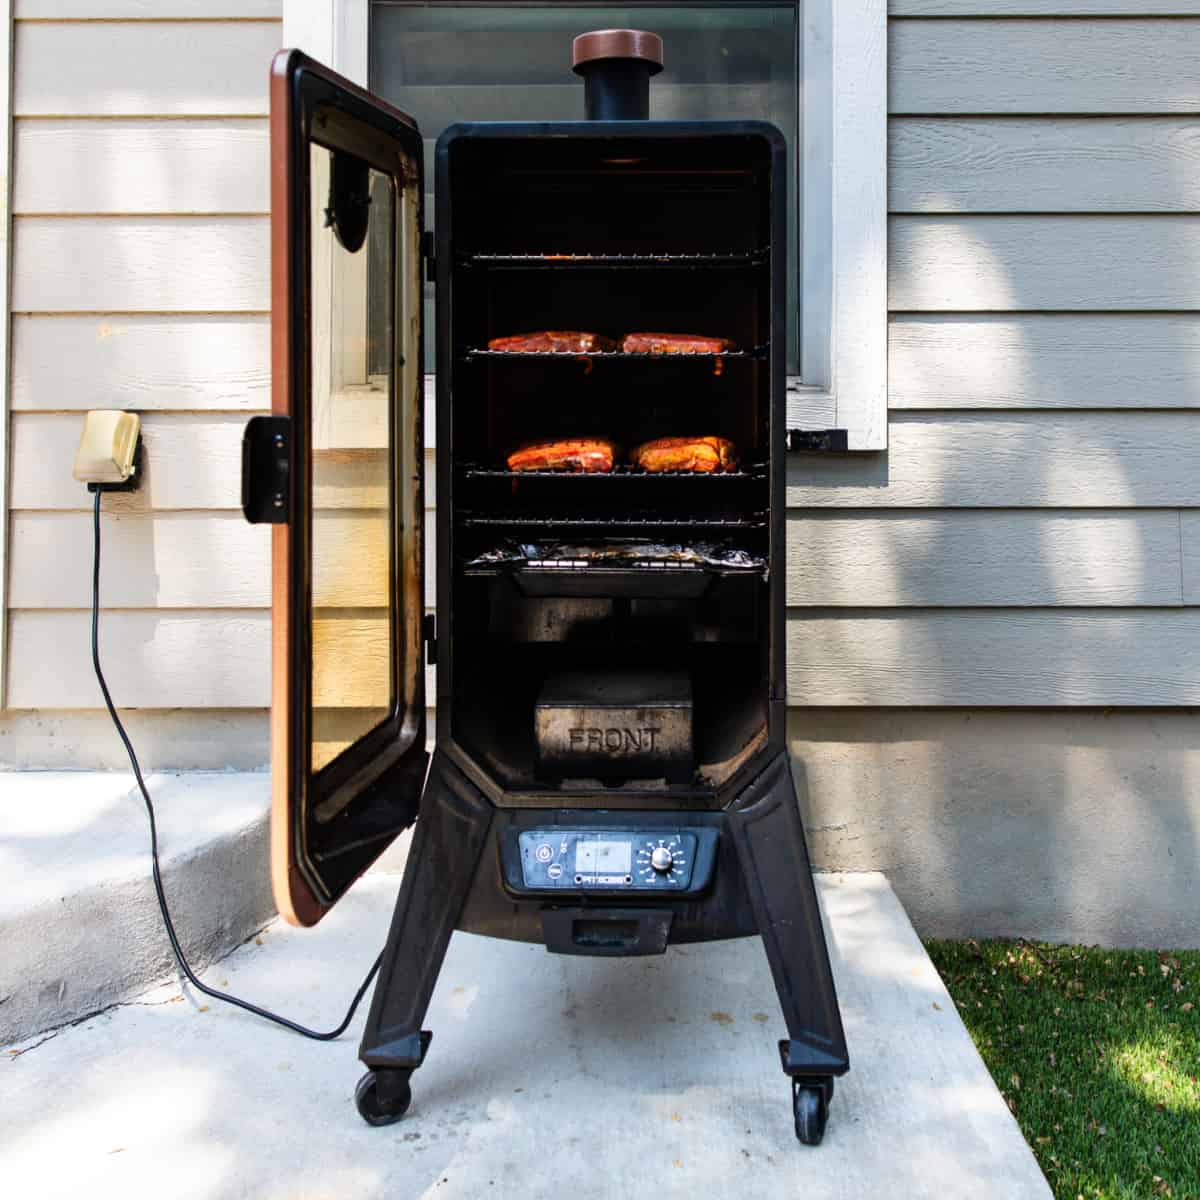 upright smokers with ribs cooking